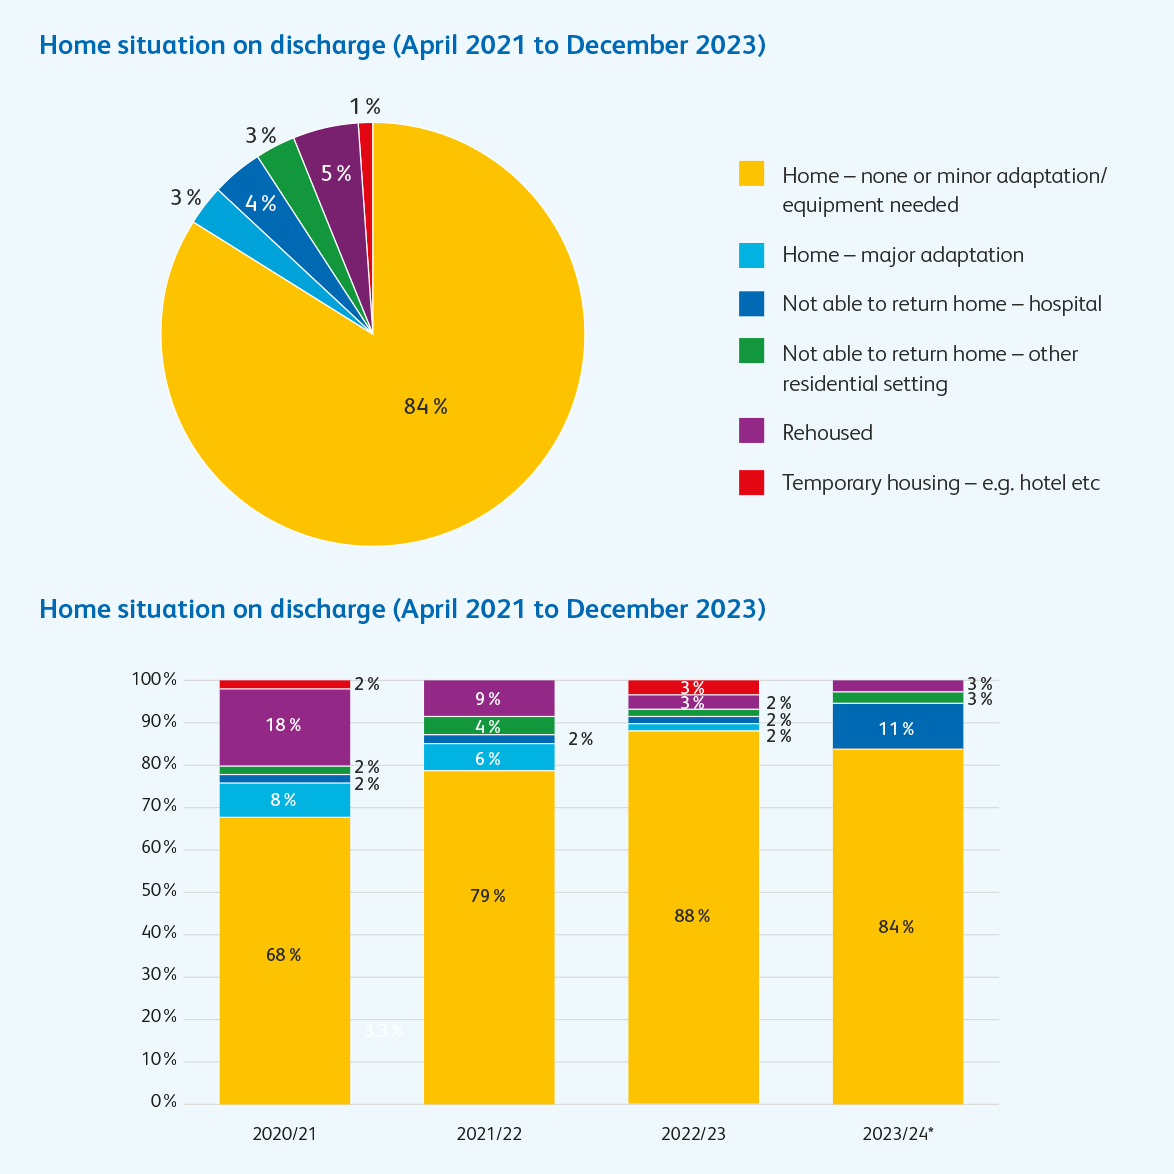 Home situation on discharge (April 2021 to December 2023)